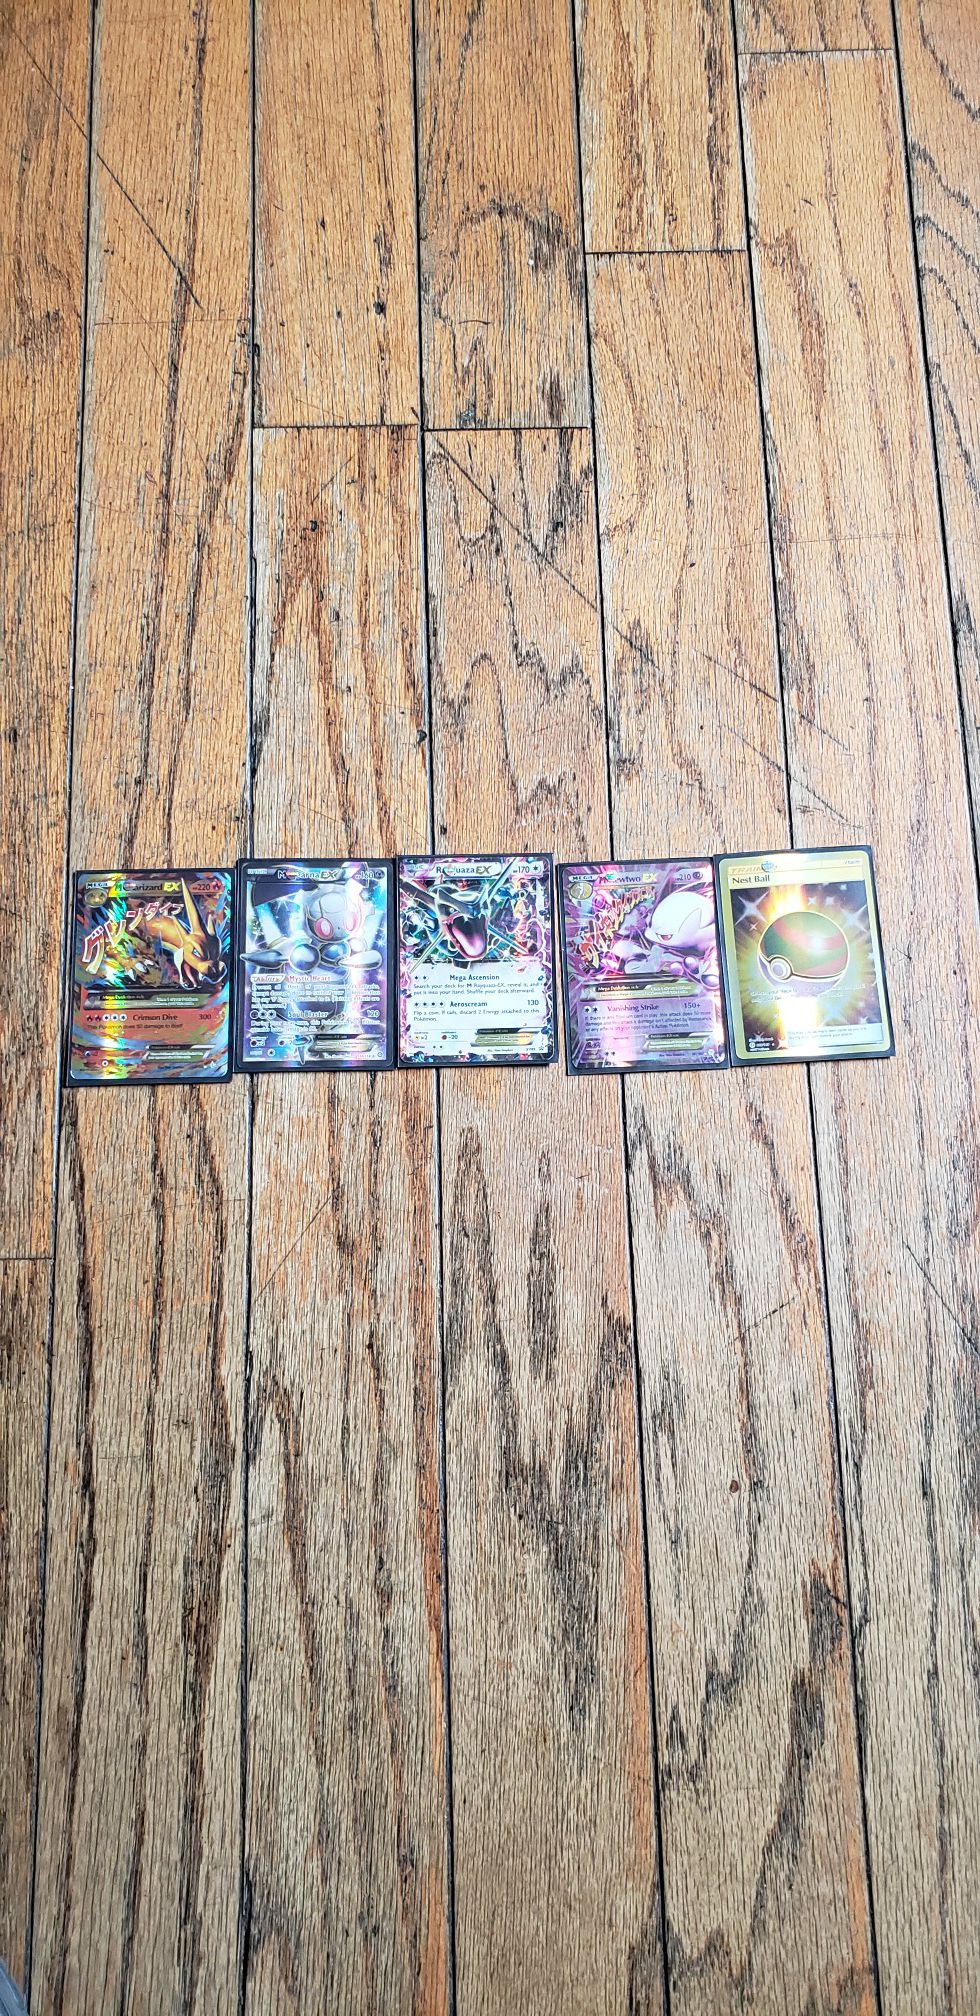 Pokemon Mega Ex And Ex Collectable Cards